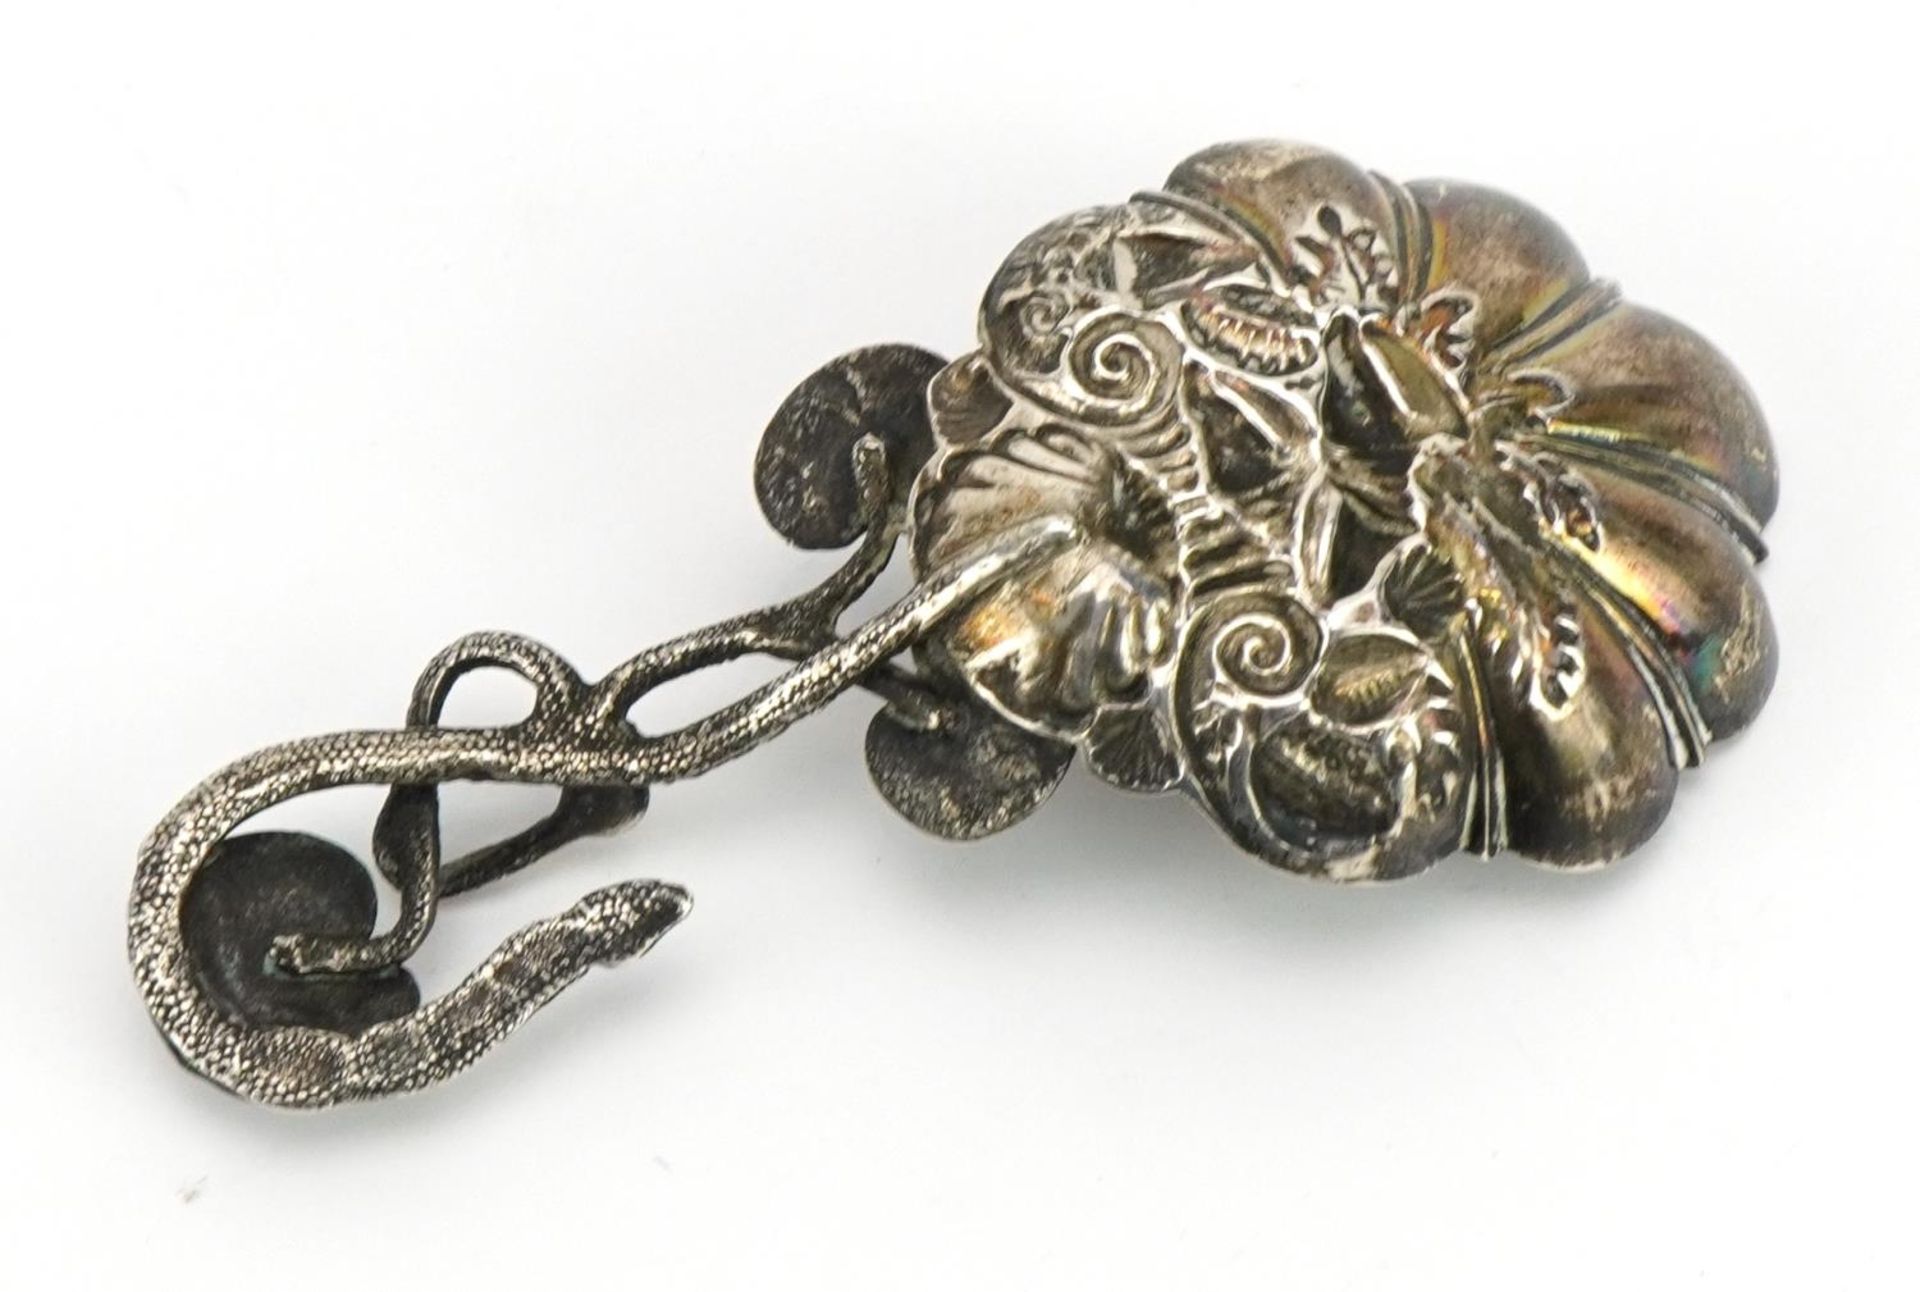 Victorian silver caddy spoon with naturalistic form, the bowl embossed with seashells, Birmingham - Image 2 of 3